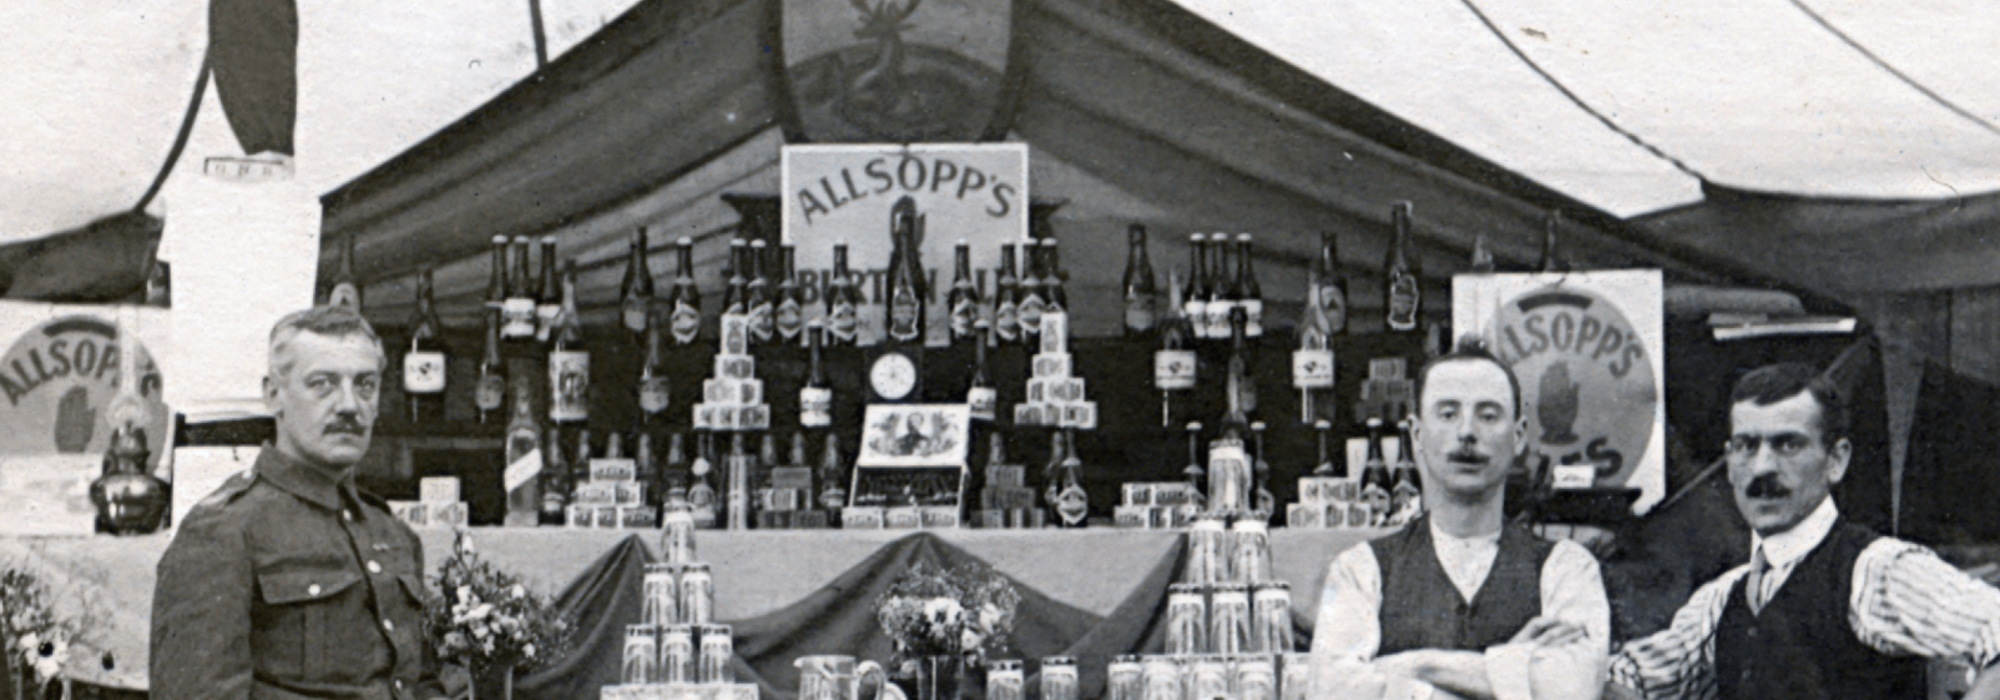 Allsopp's beers being sold in the 19th century